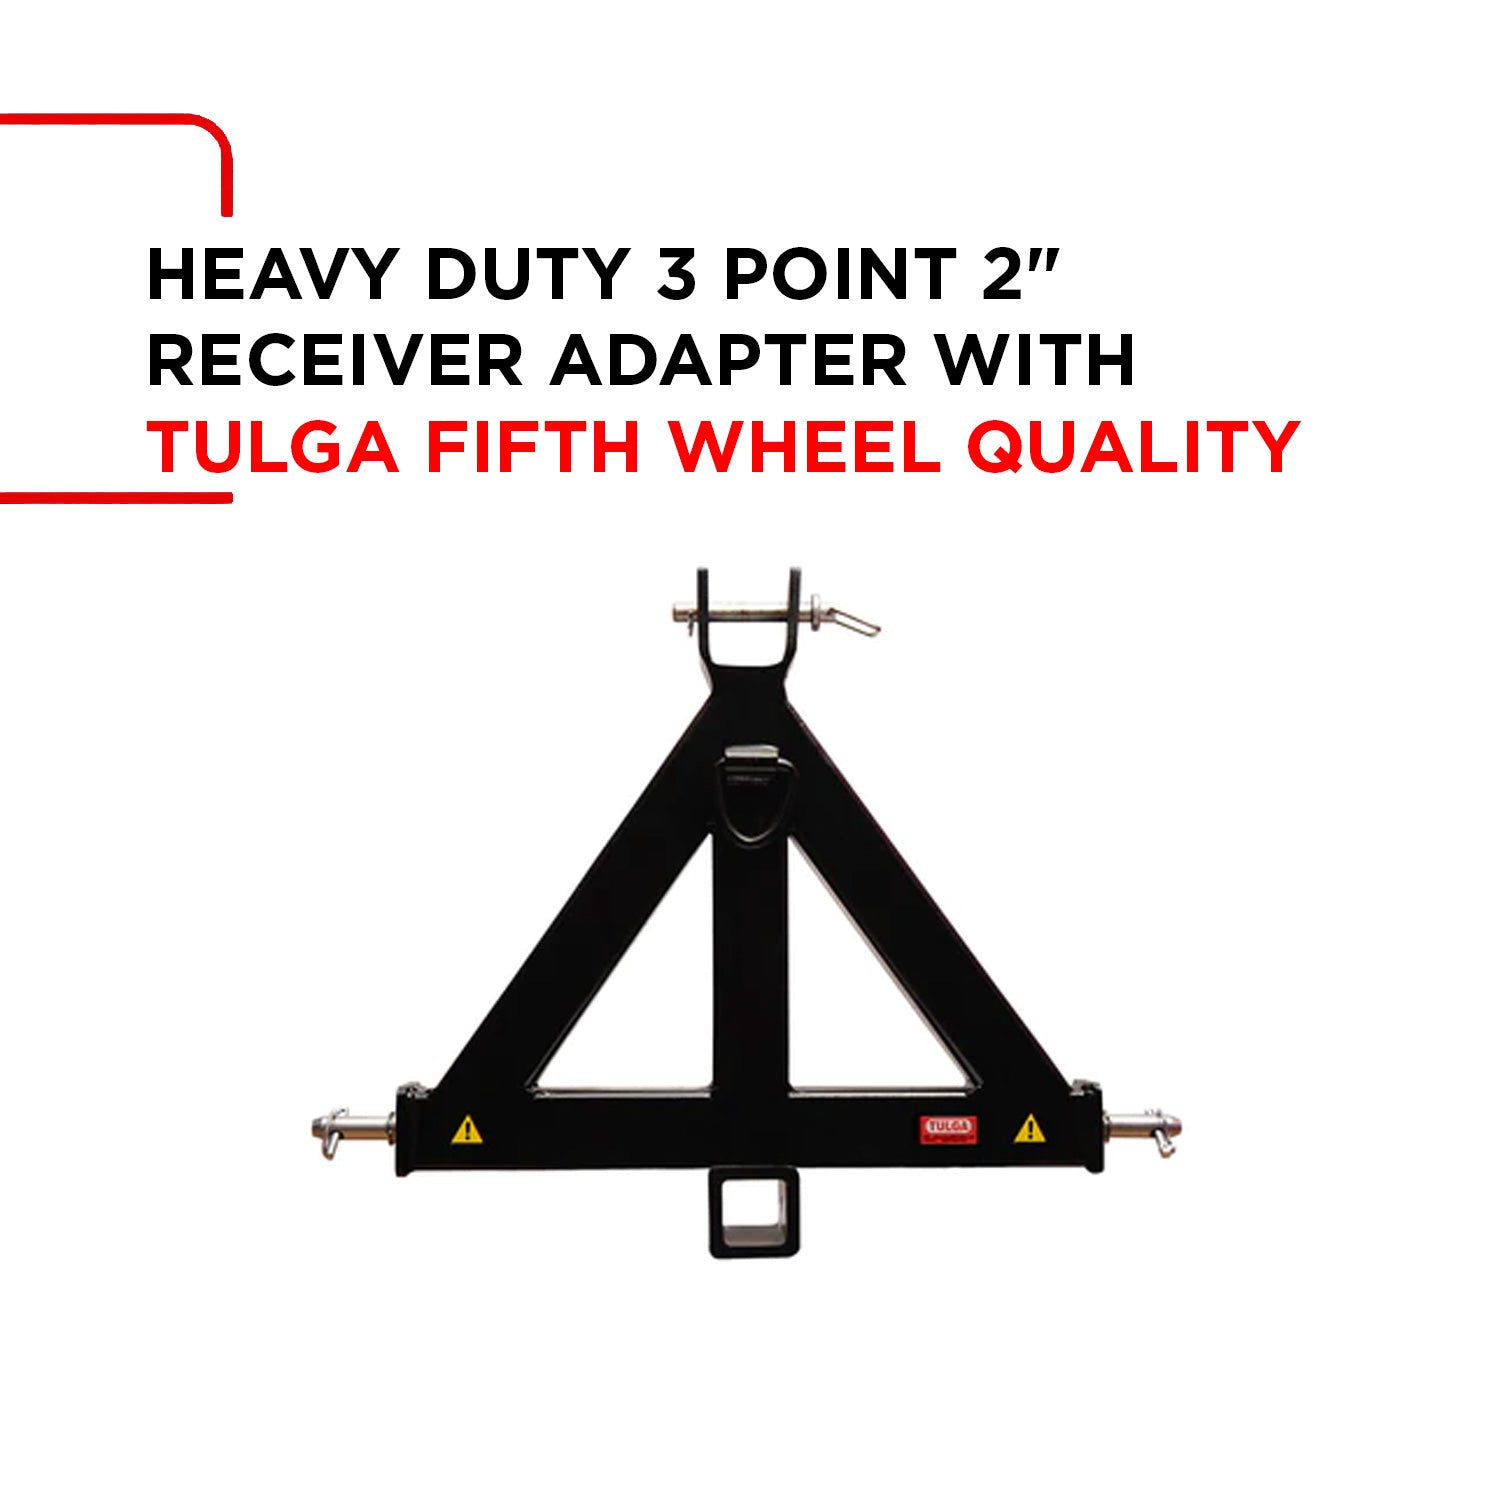 Heavy Duty 3 Point 2" Receiver Adapter with Tulga Fifth Wheel Quality